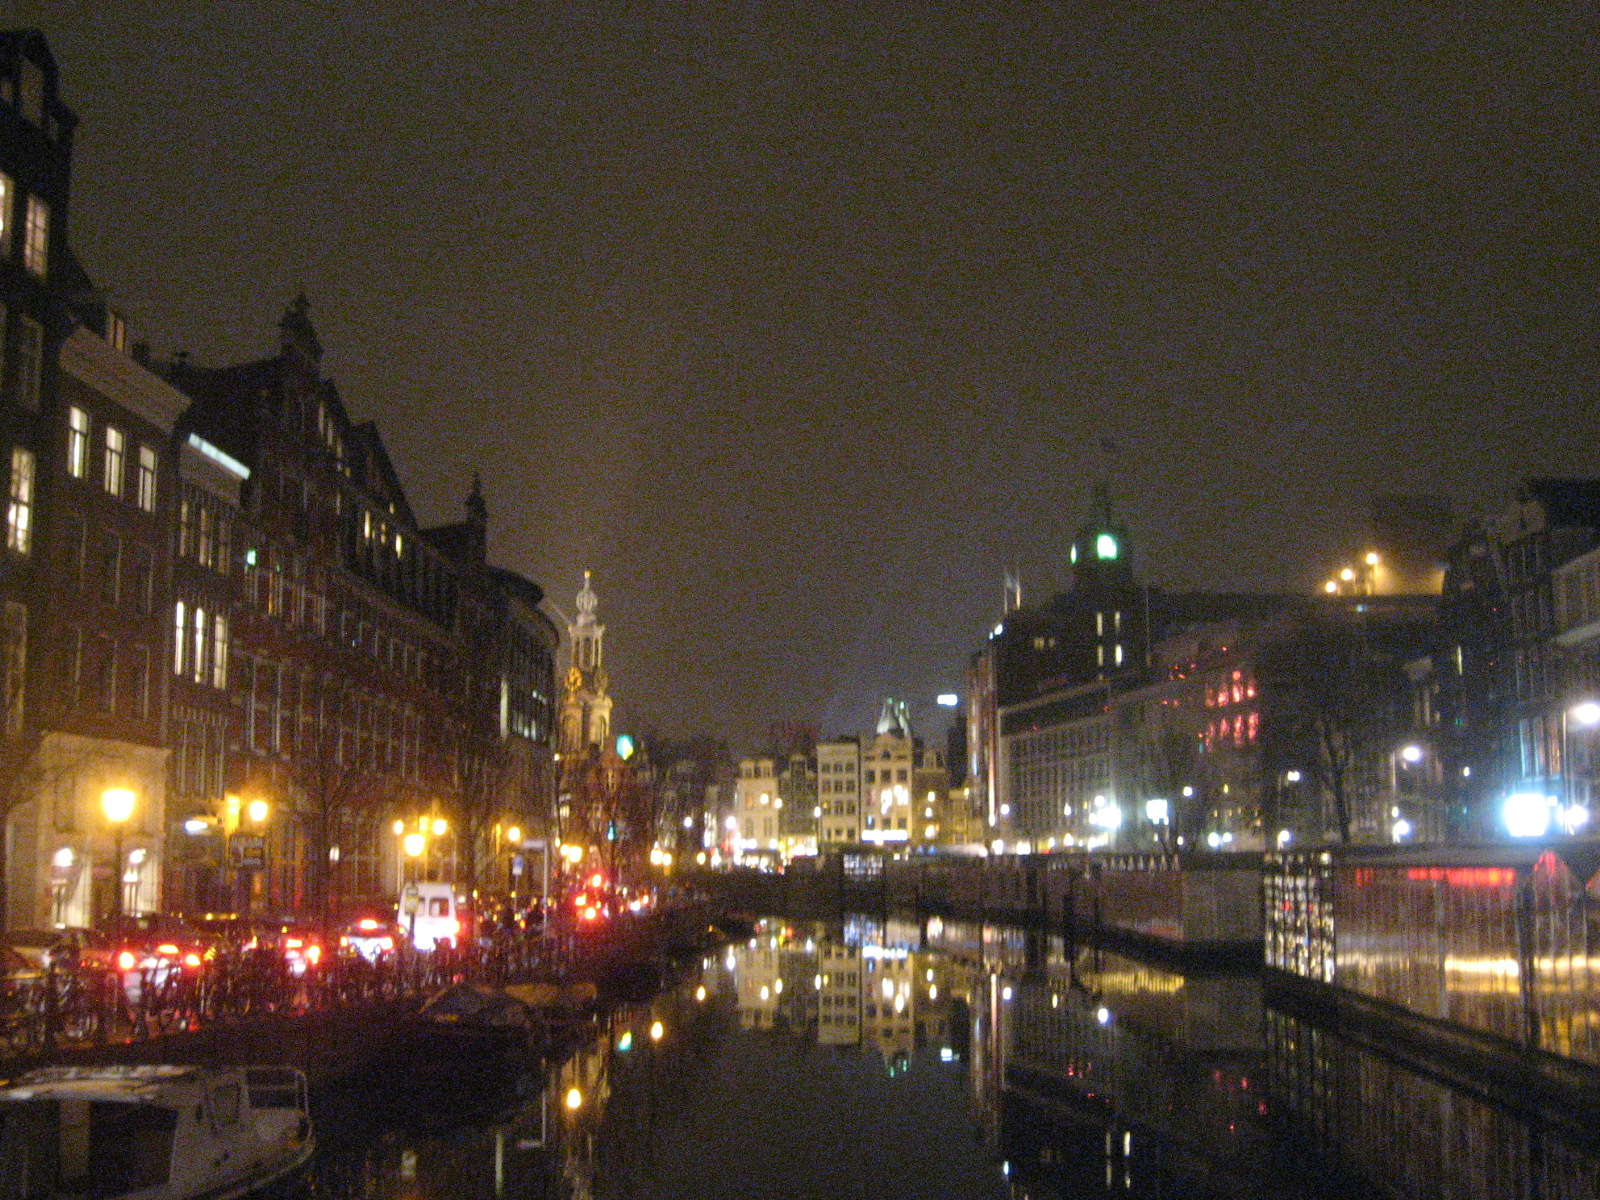 a city scene with lots of boats in the canal at night